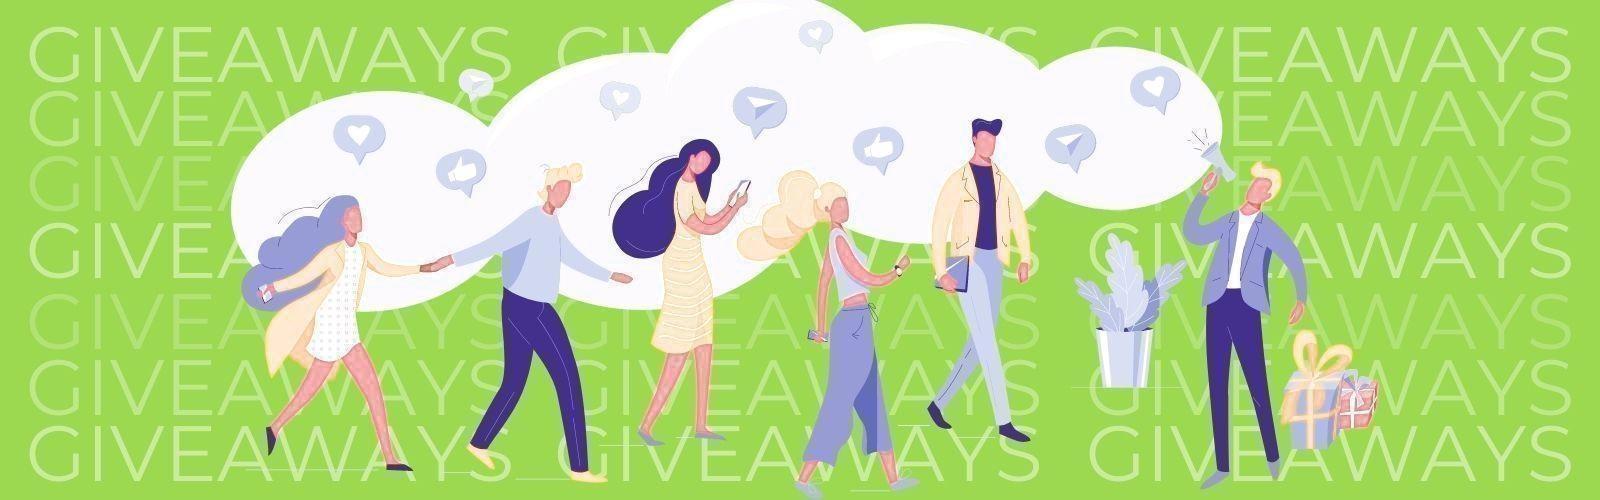 Do Giveaways Work? — The Truth 